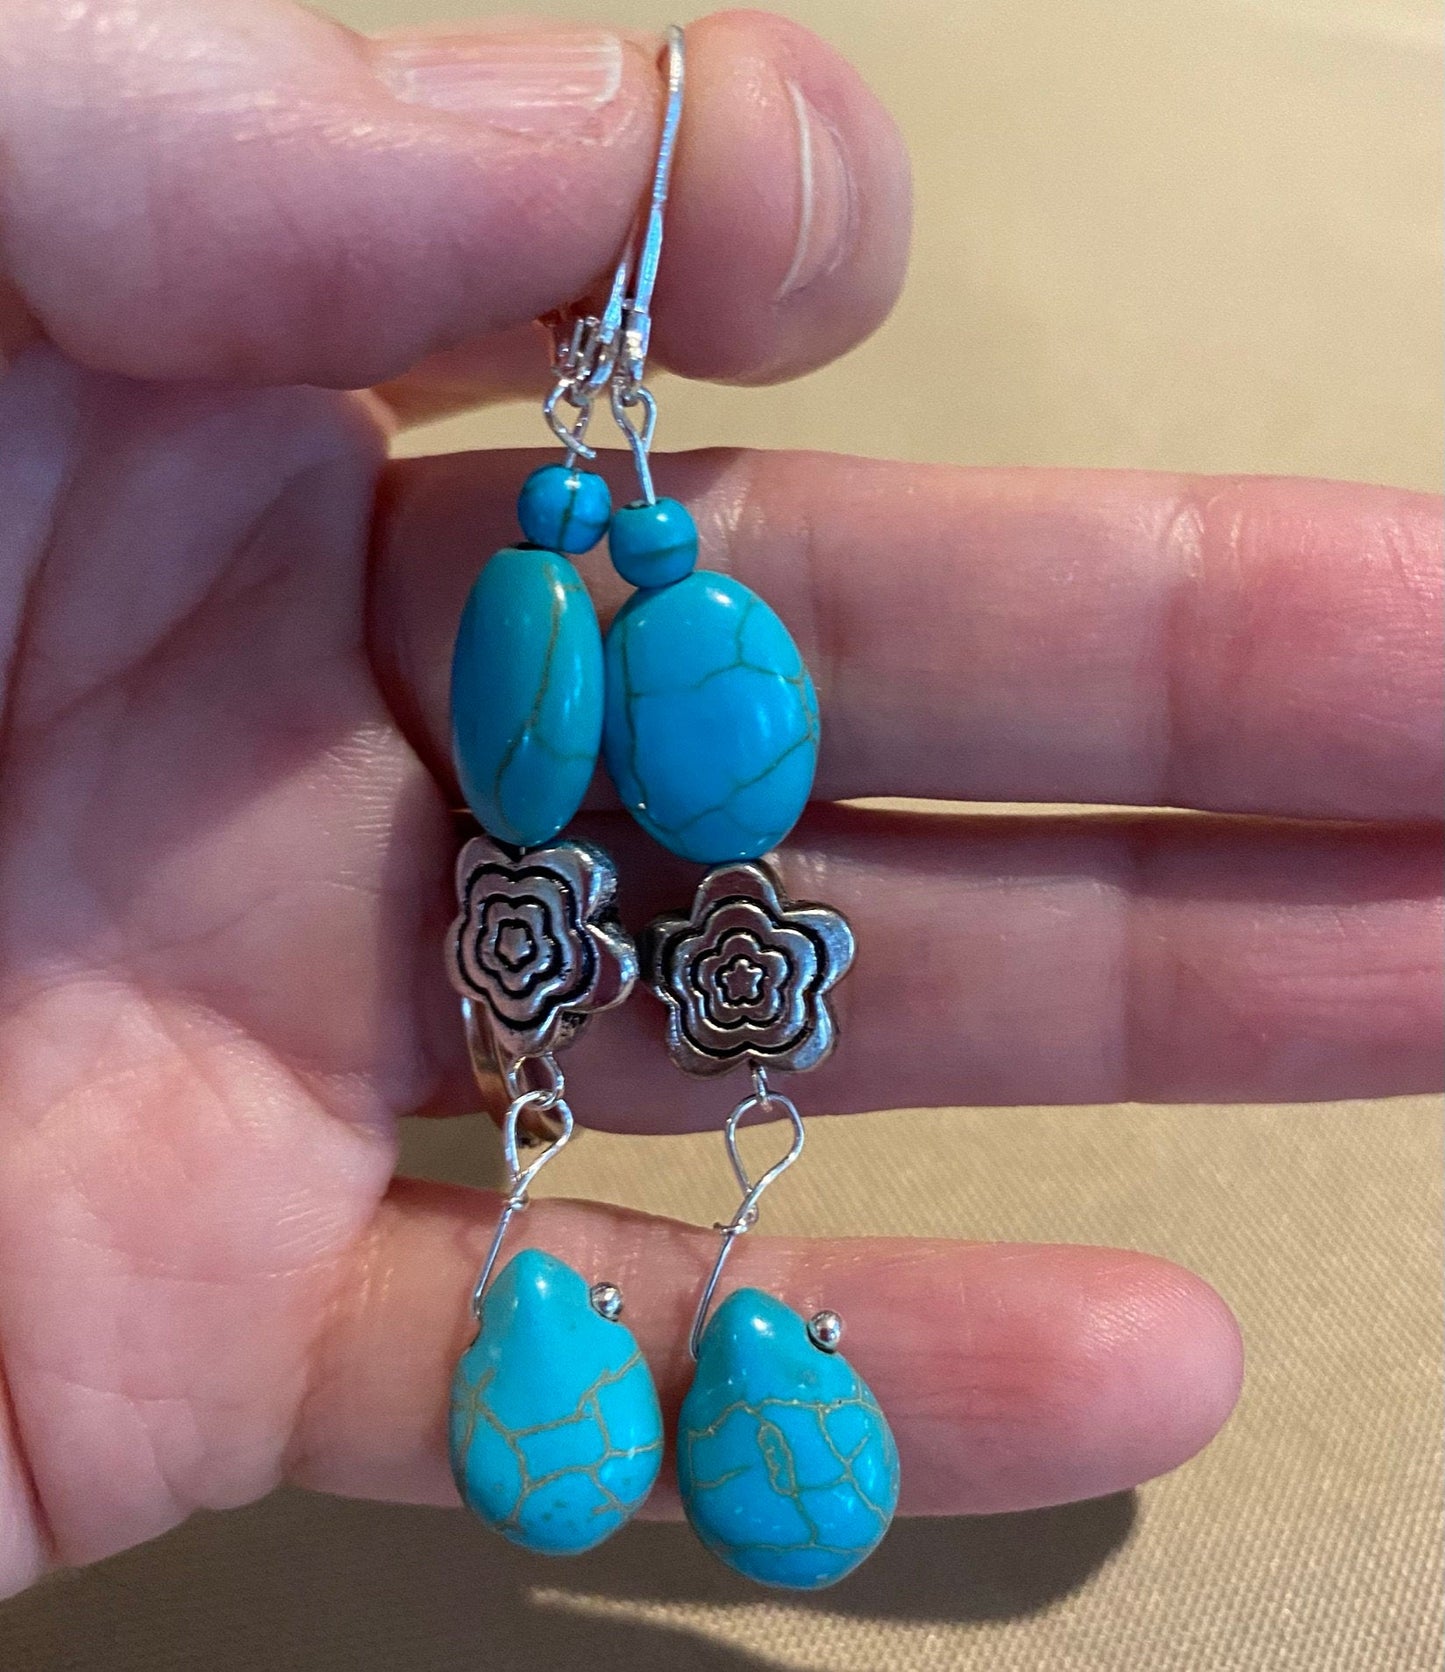 Turquoise Beads with Silver Flower Earrings